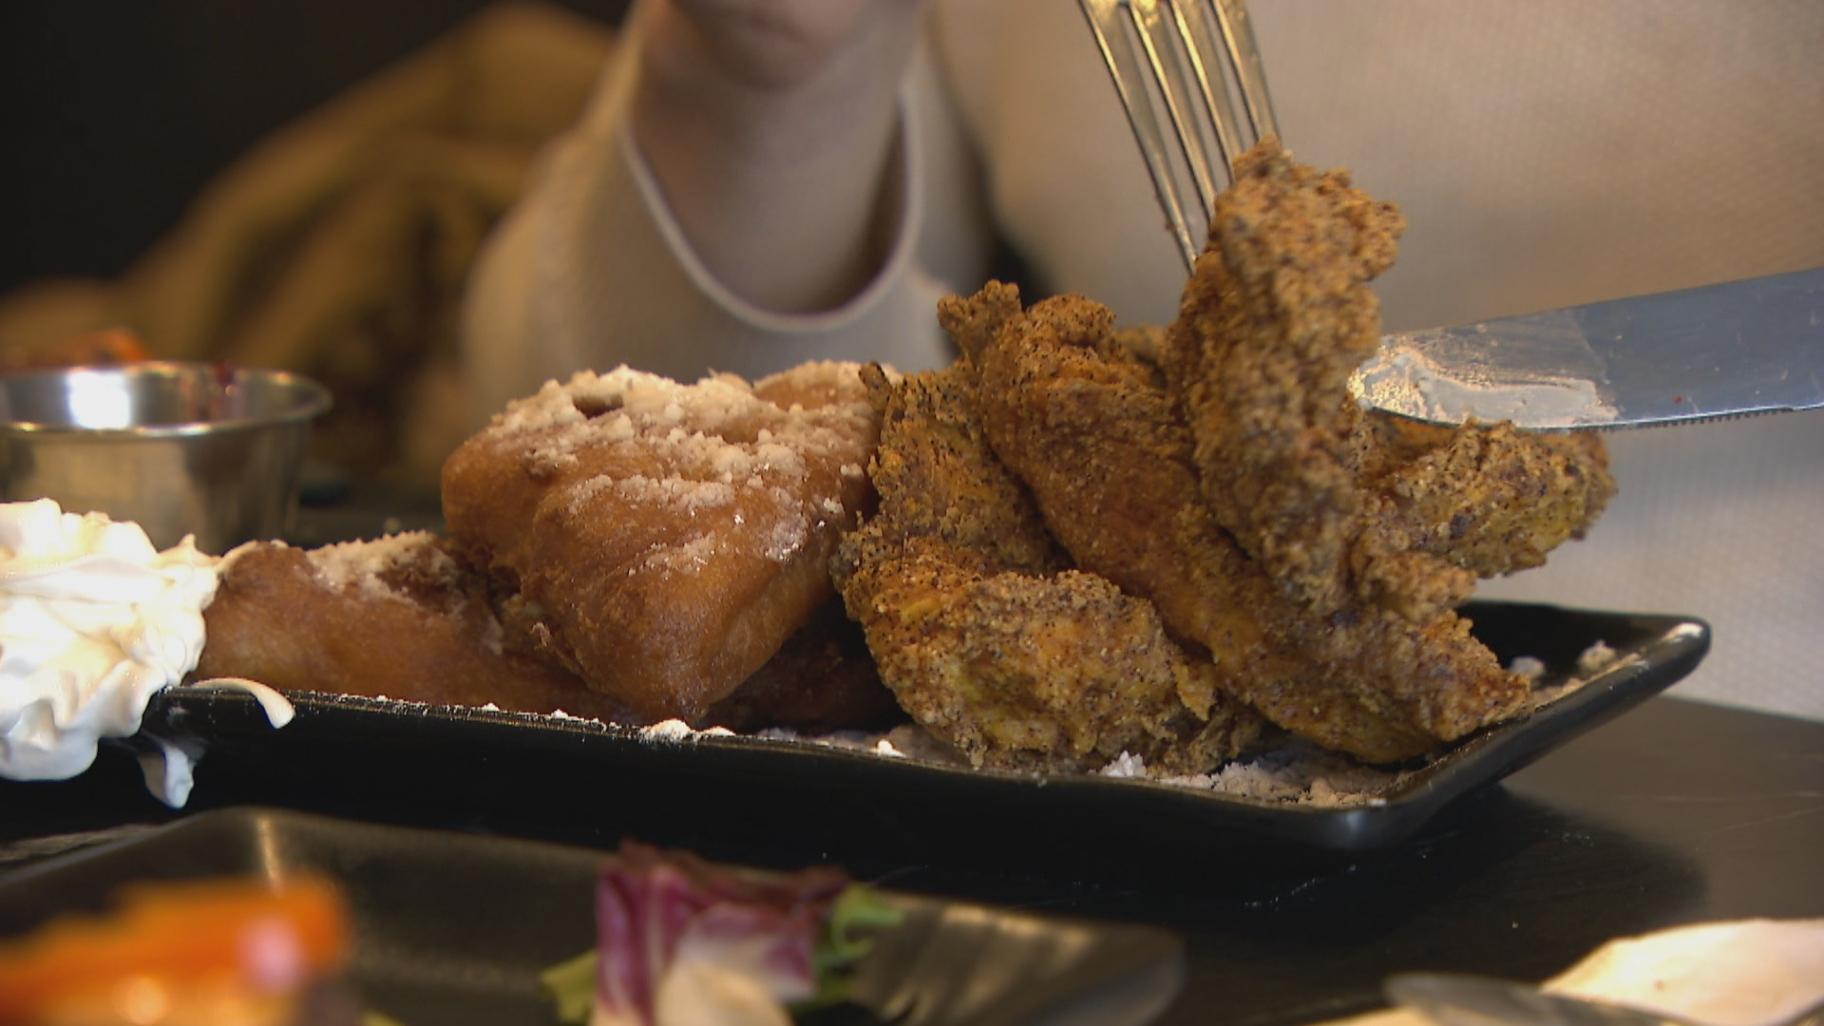 The kitchen at Chesaâs Bistro & Bar is entirely gluten-free. (WTTW News)